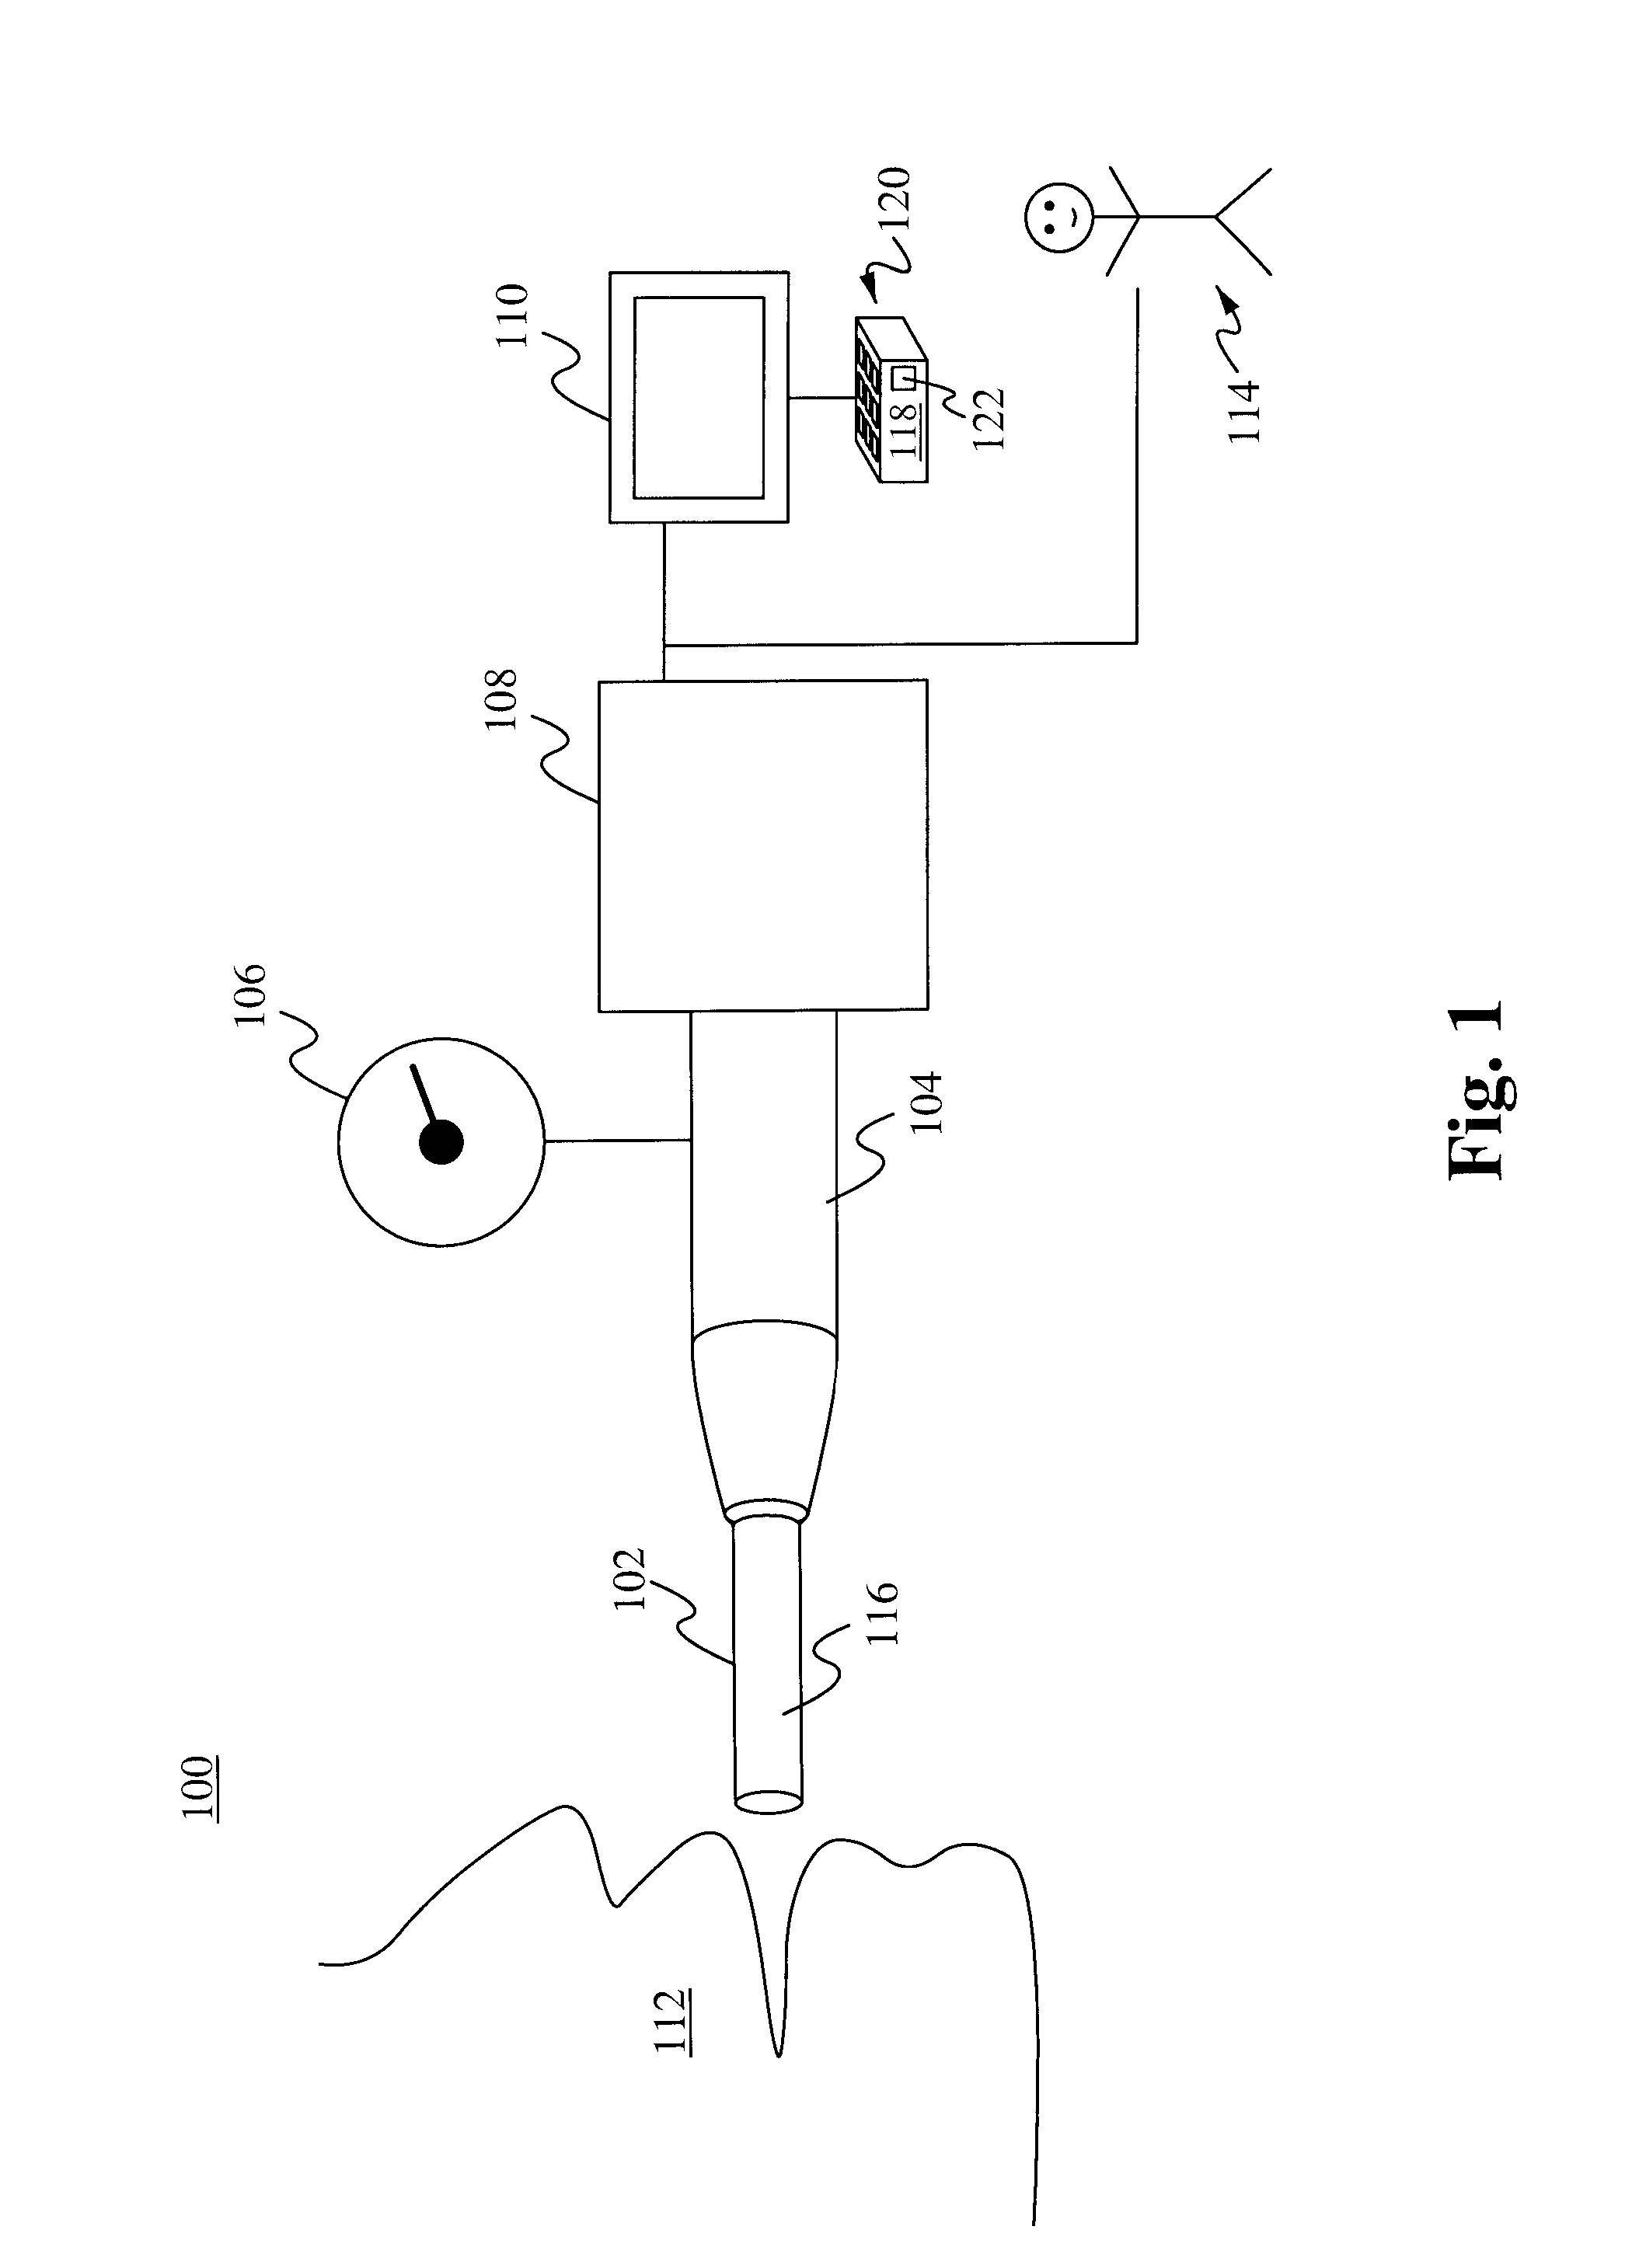 Methods of and devices for monitoring the effects of cellular stress and damage resulting from radiation exposure